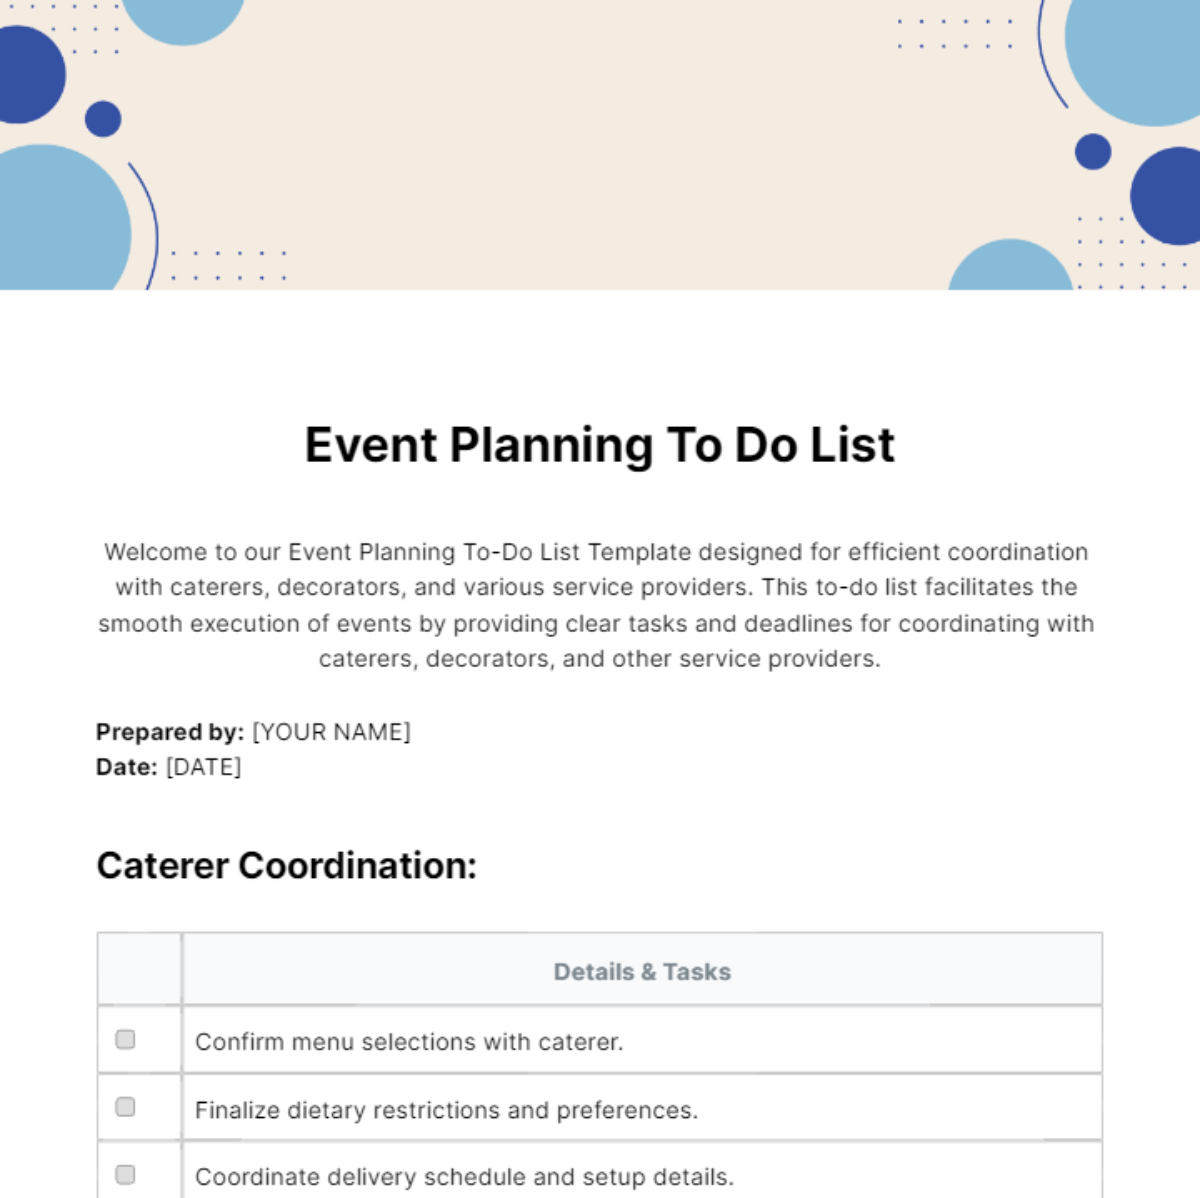 Event Planning To Do List Template